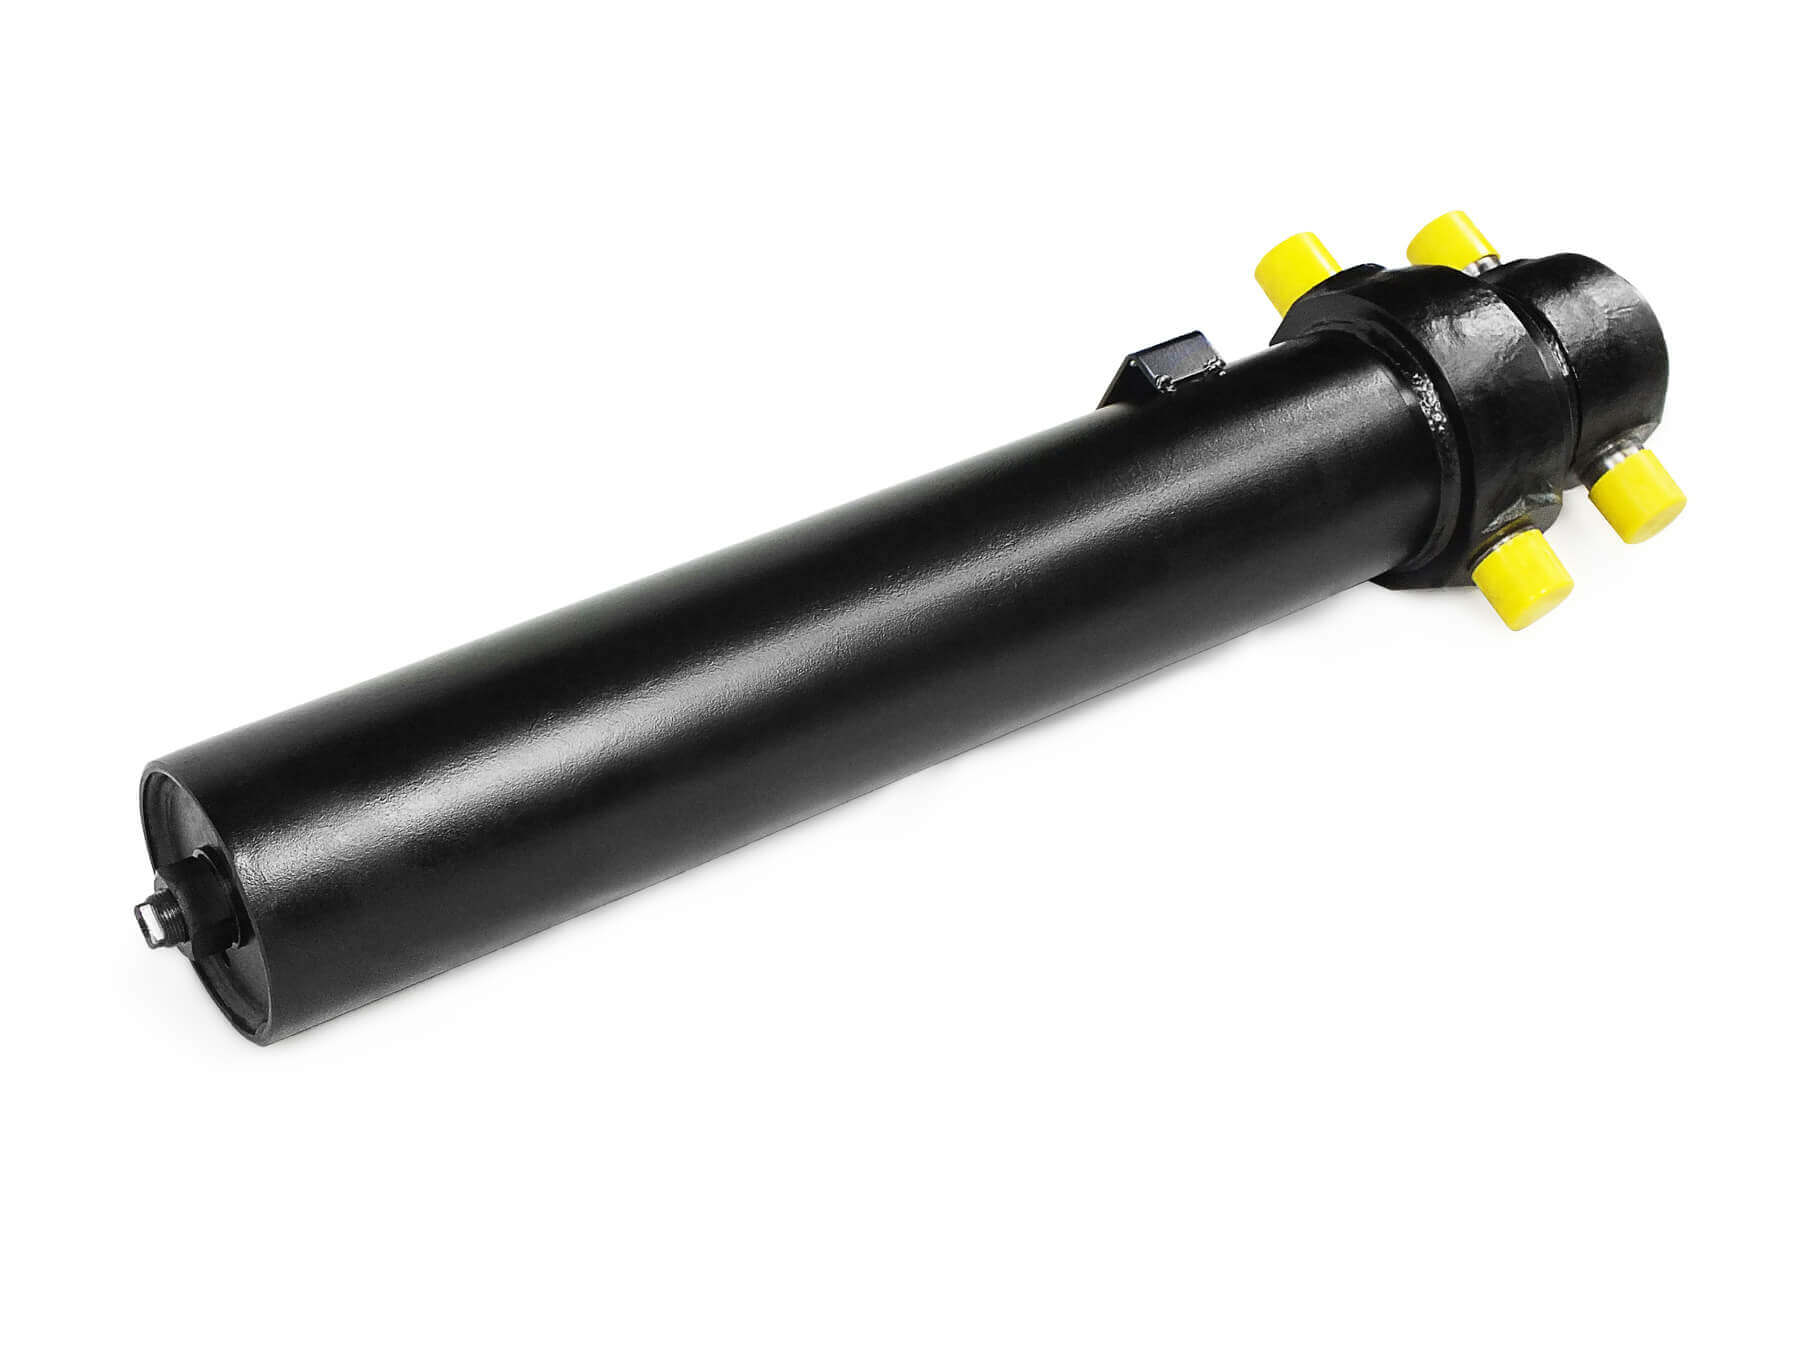 Telescoping Cylinders Manufacturers and Suppliers in the USA